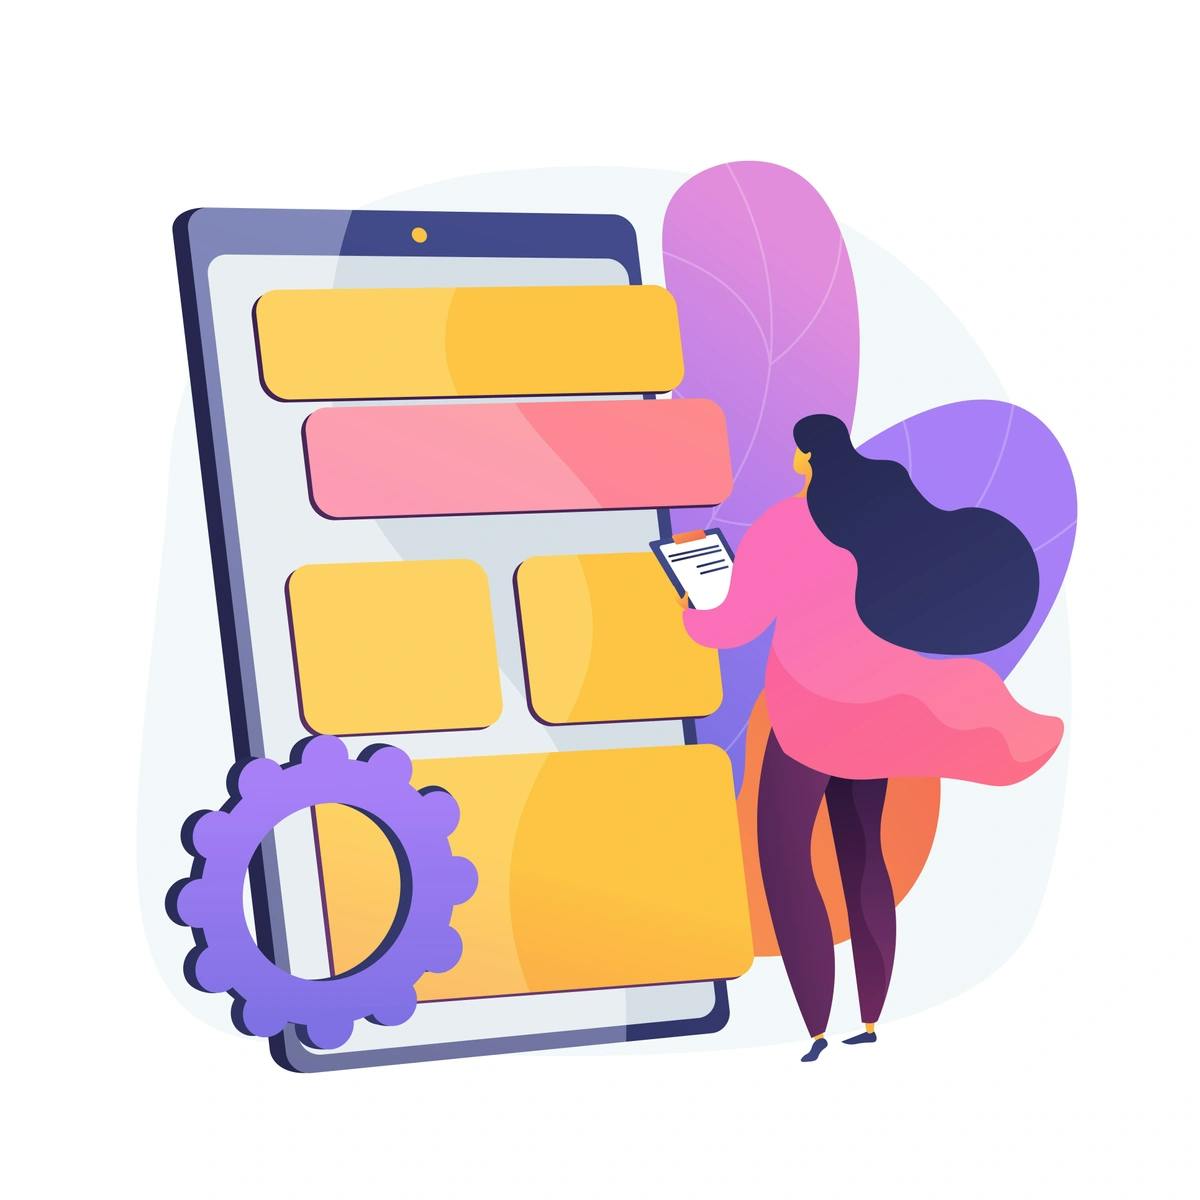 A vector illustration of a woman interacting with a large smartphone interface, which displays various rectangular elements and a gear icon, suggesting task management or app customization.